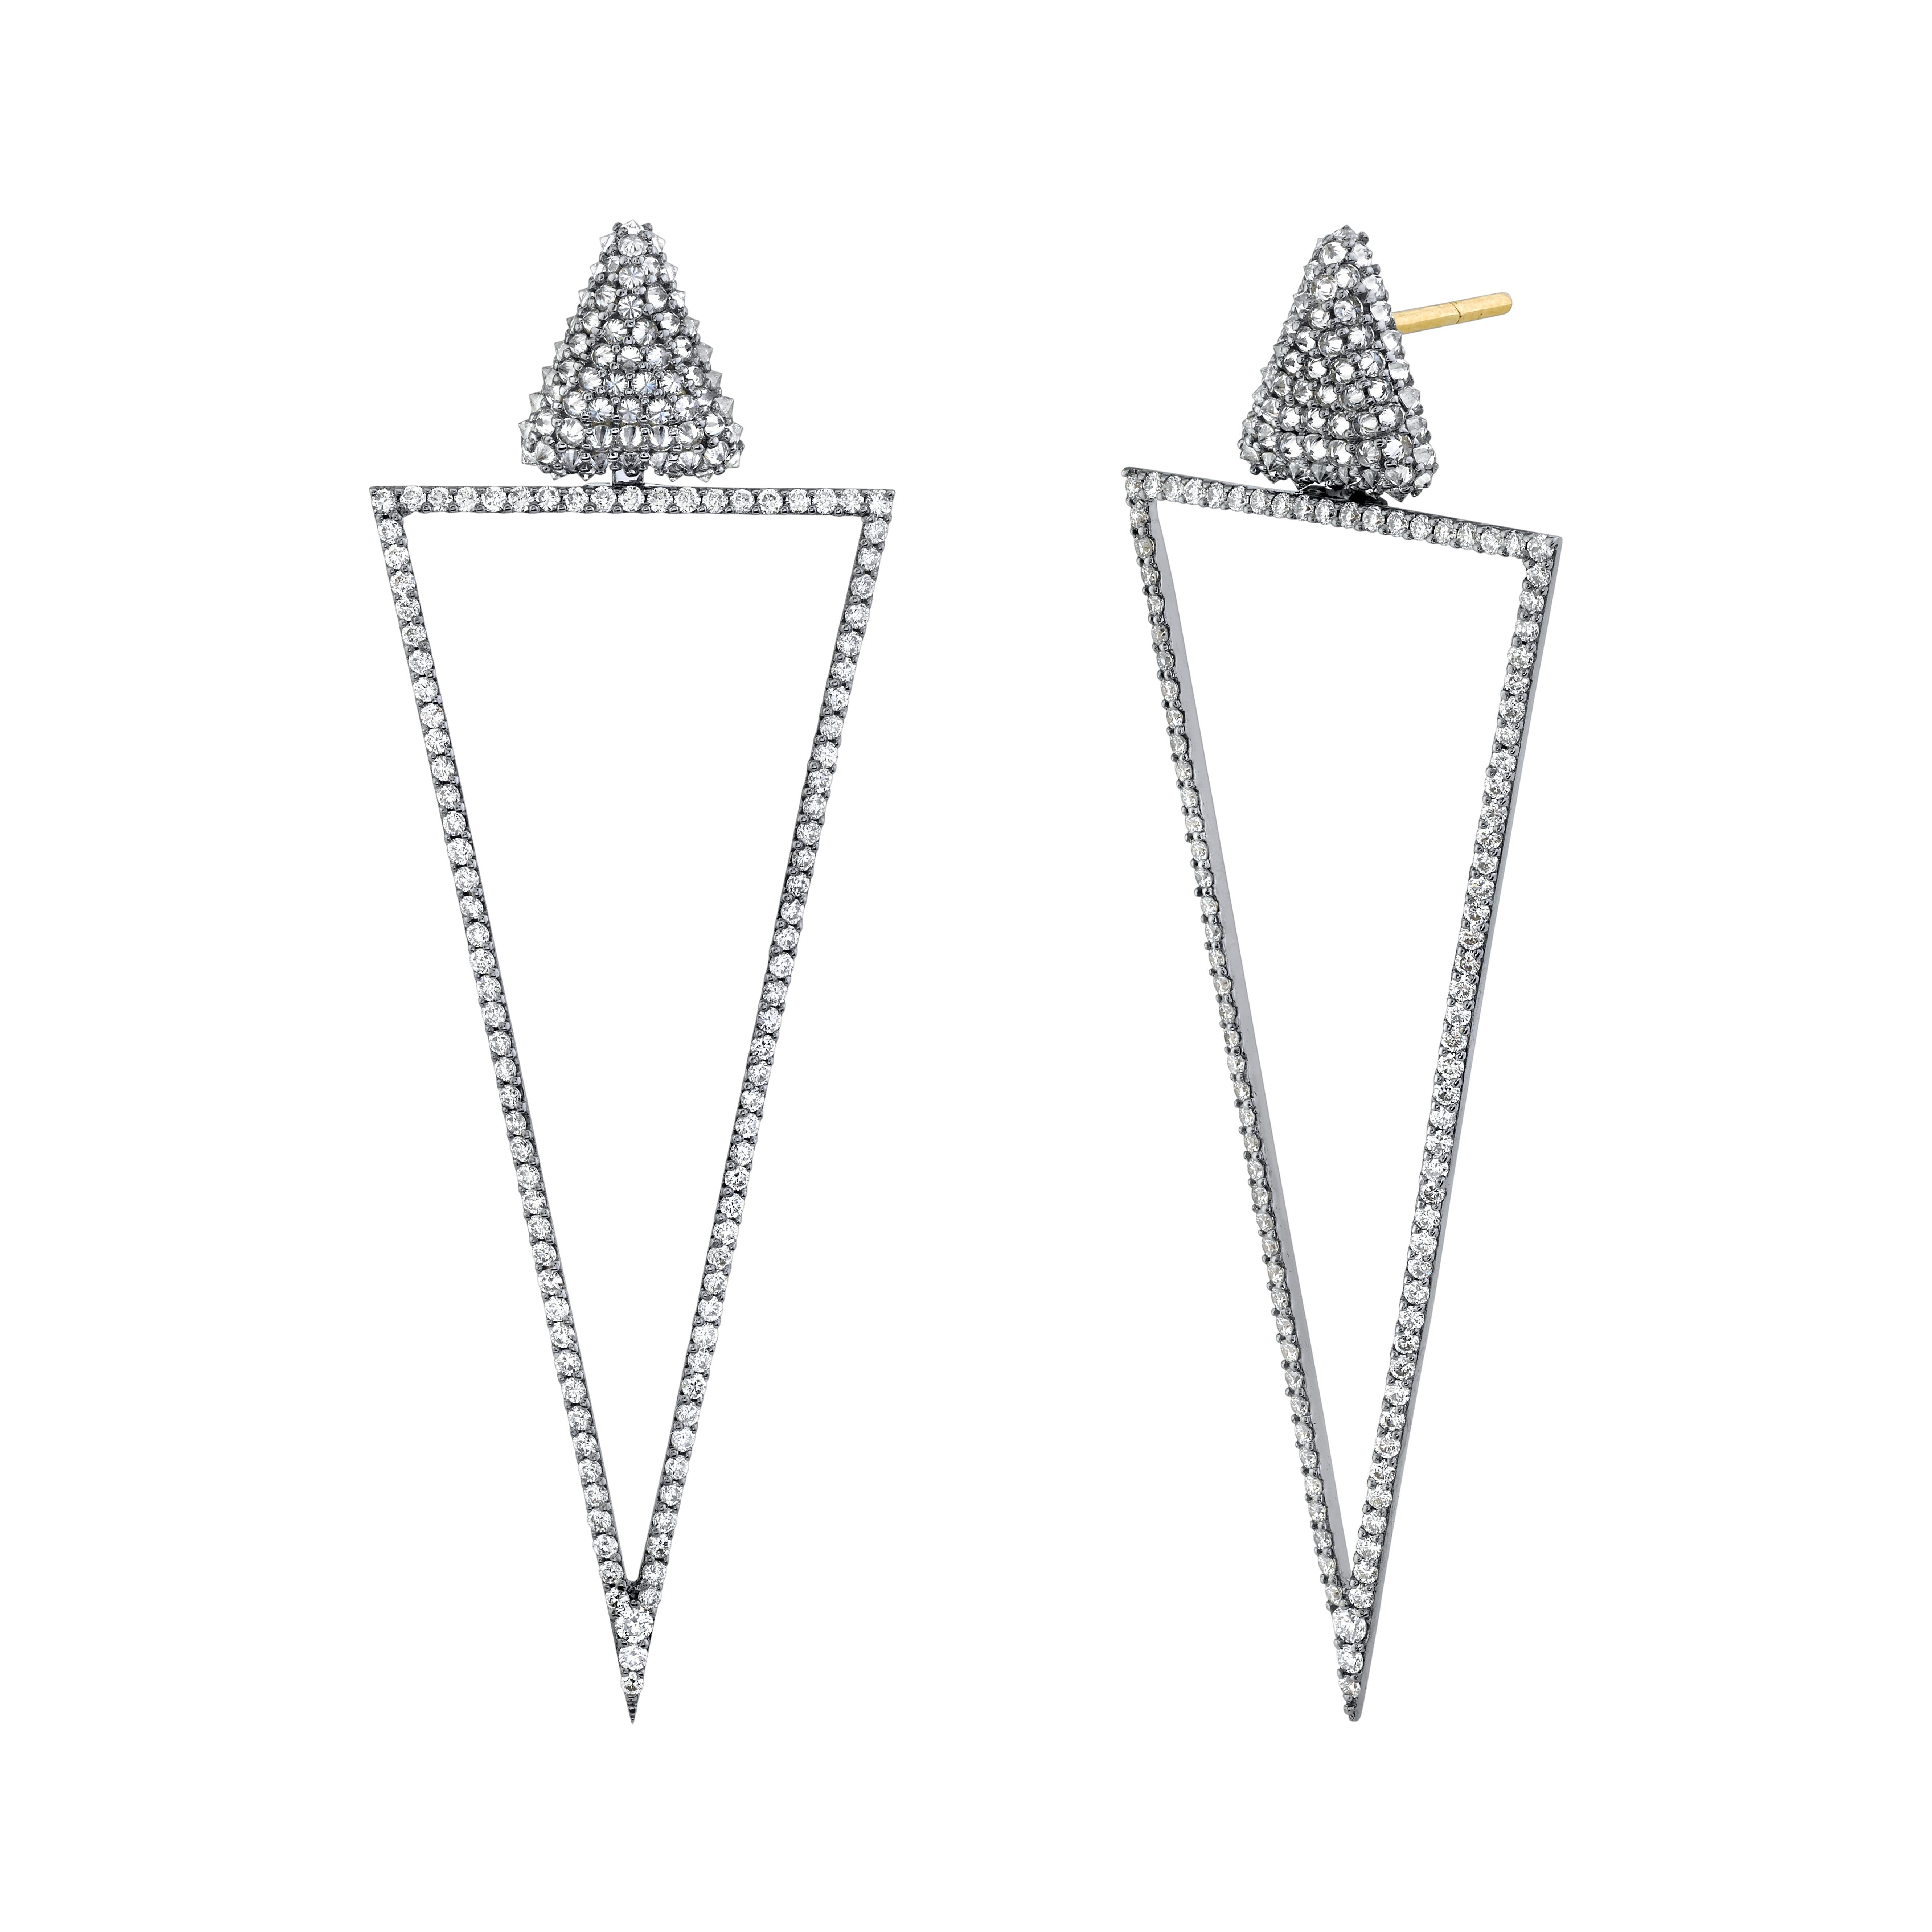 These beautiful earrings feature 1.99 carats of dazzling diamonds set in 18 karat blackened gold. The uniquely designed triangle-shaped stud portion of these earrings features reverse set diamonds. The drop portion of these earrings features